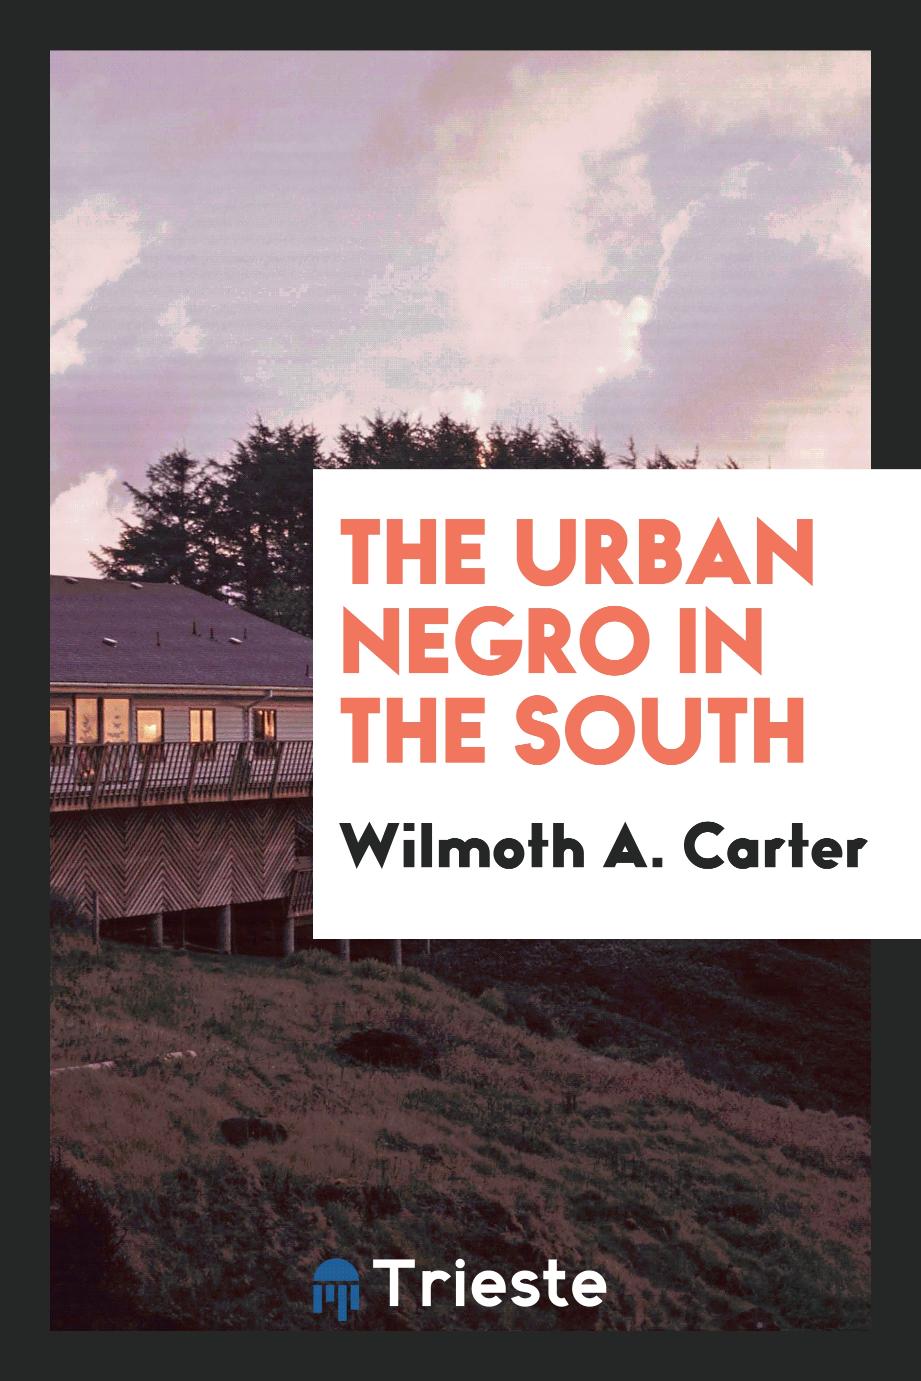 The urban Negro in the South